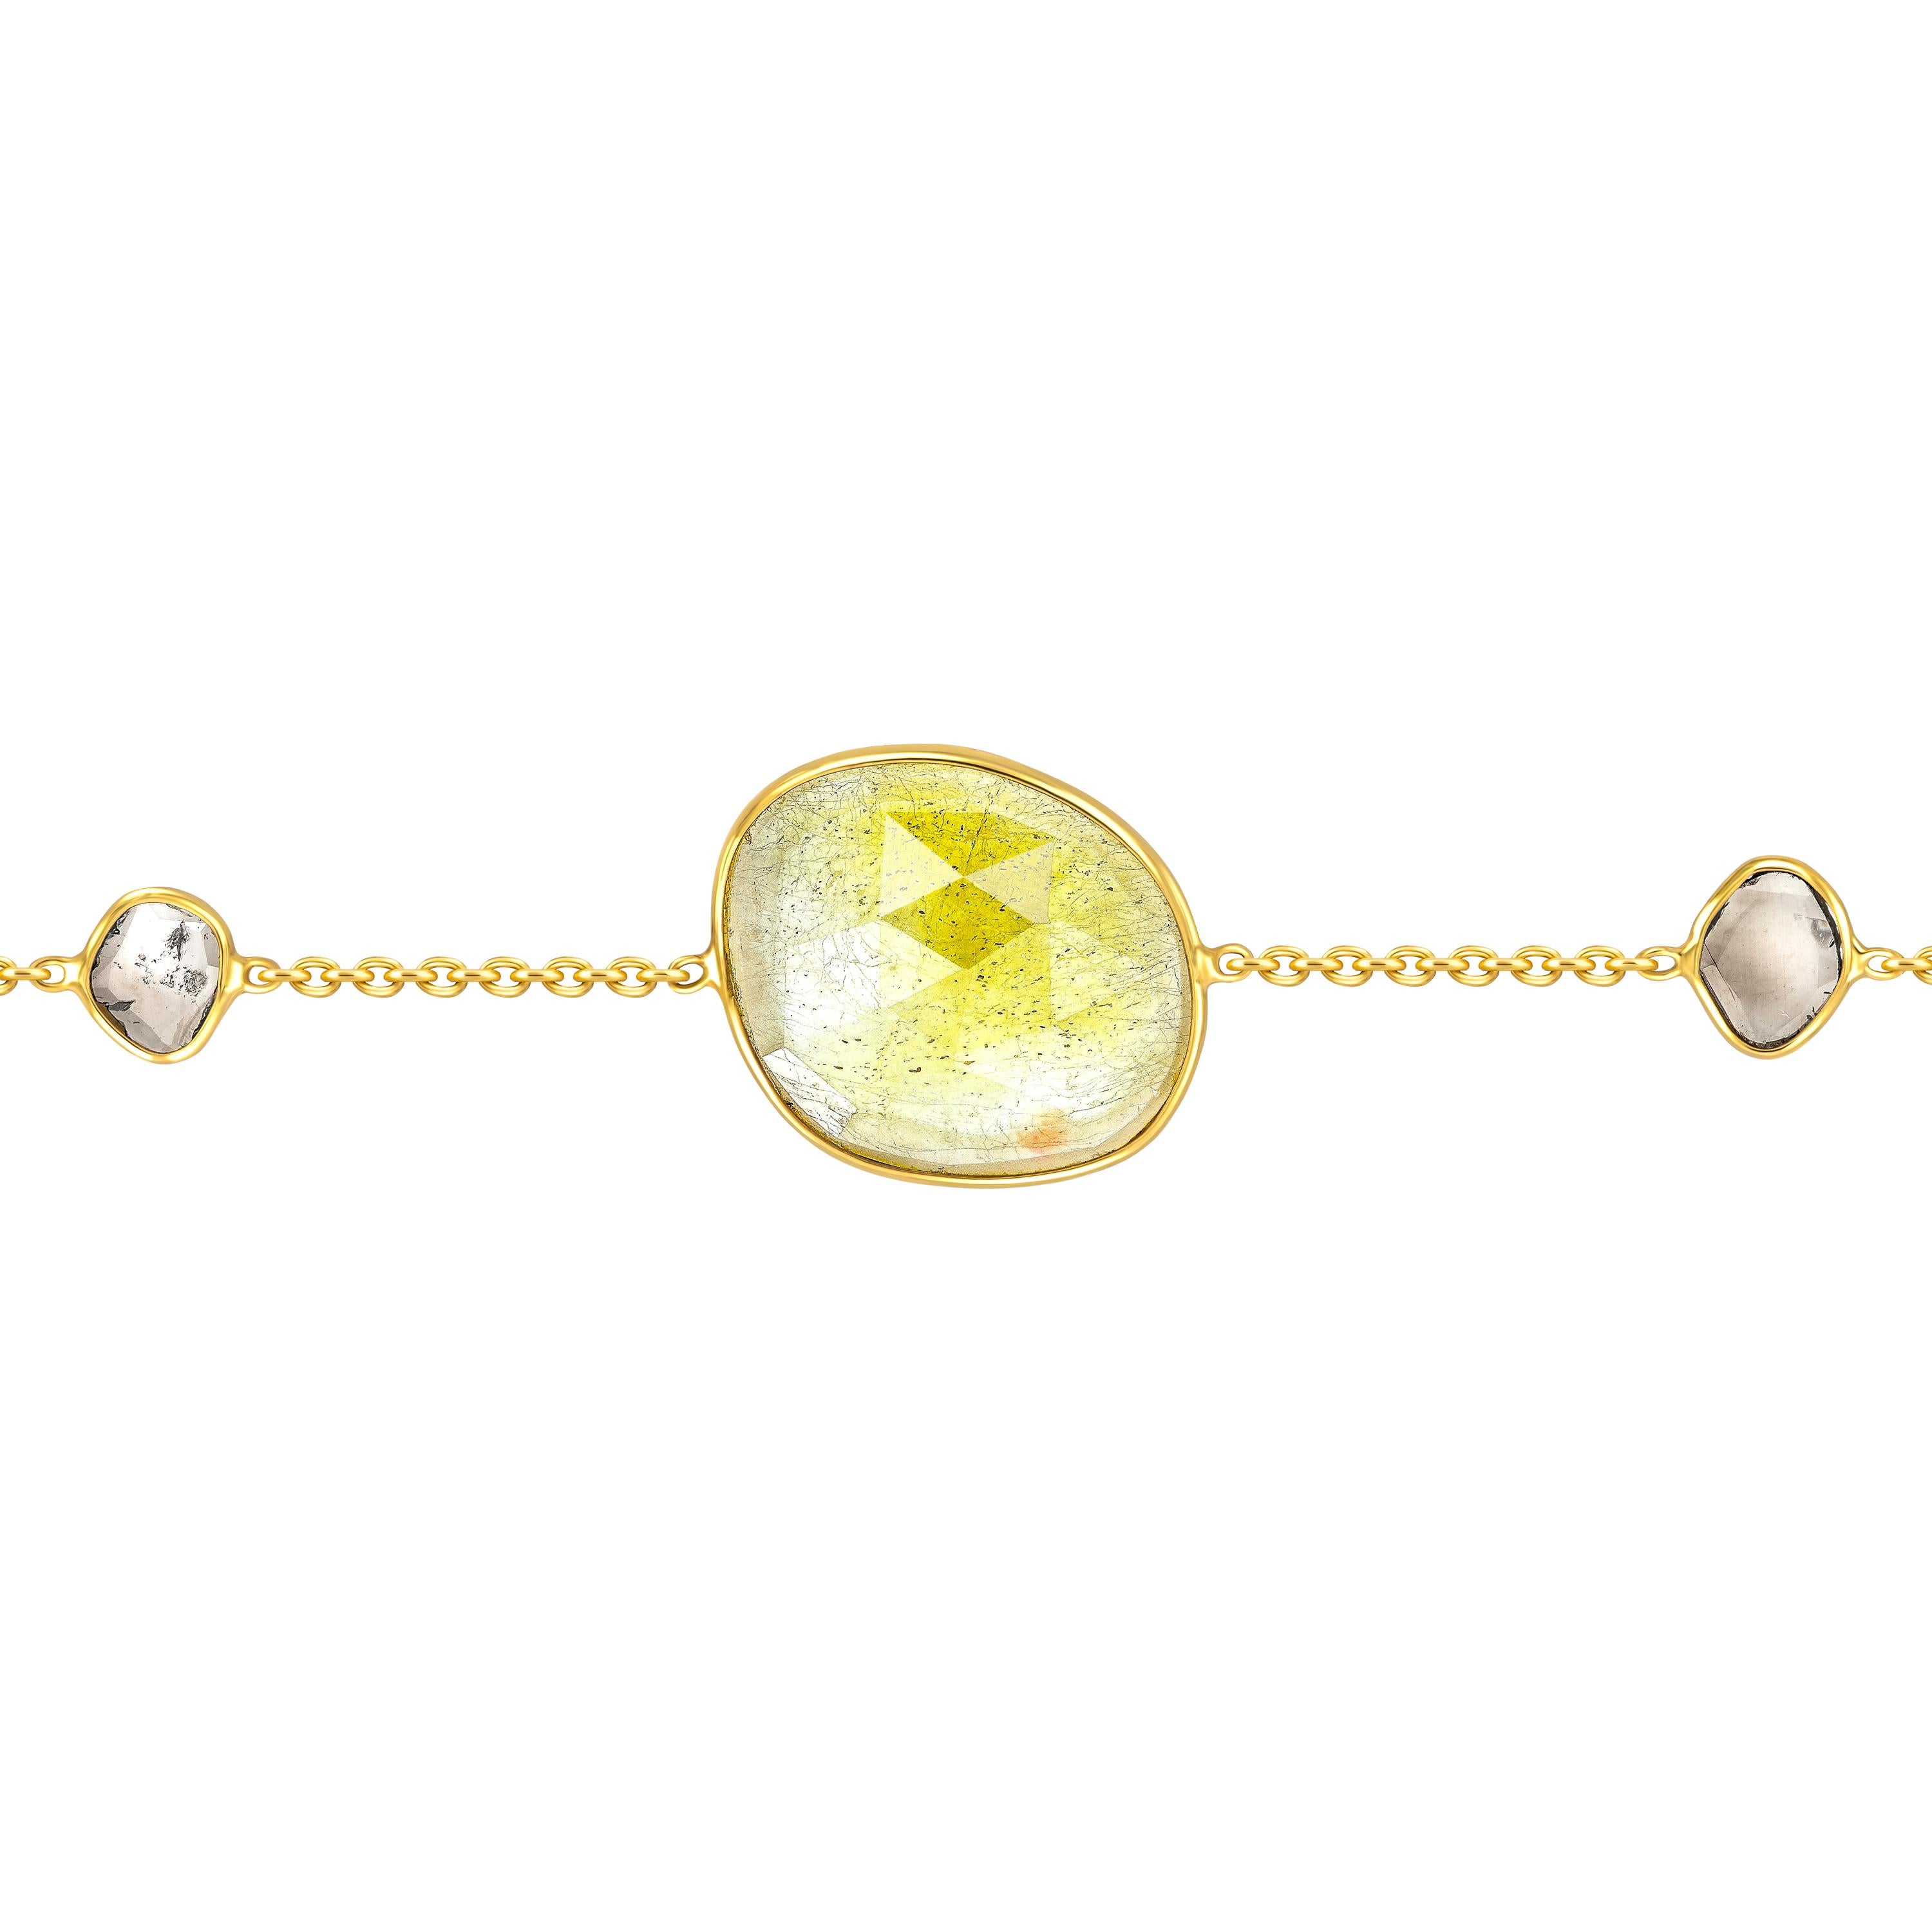 Adorn your wrist with this beautiful 3.25 Carat Rose Cut Yellow Sapphire Bracelet featuring a 0.15 Carat in two Diamond slices set in 18 Karat Yellow Gold. Each piece is hand made with a unique shaped precious stone in the center and sides so no two